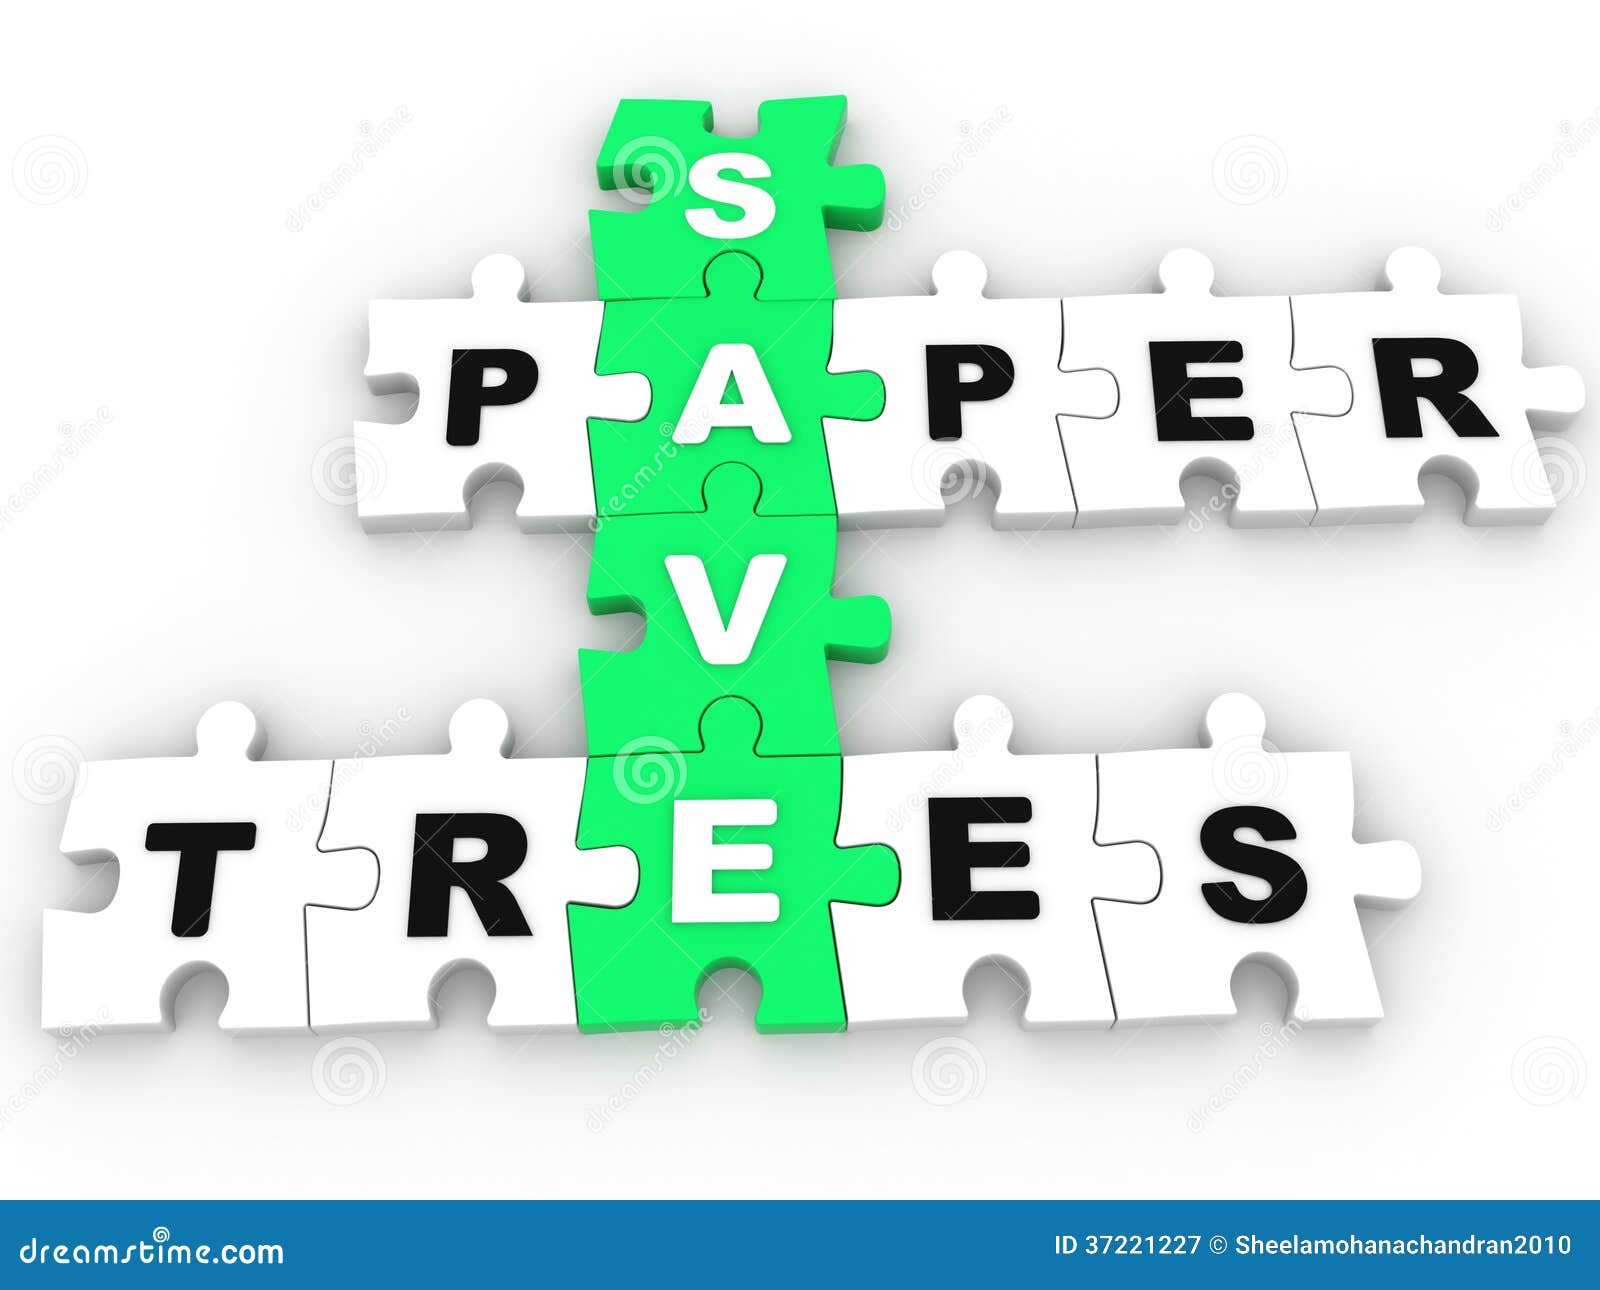 Save Paper, Save Trees Puzzle Crossword Stock Illustration